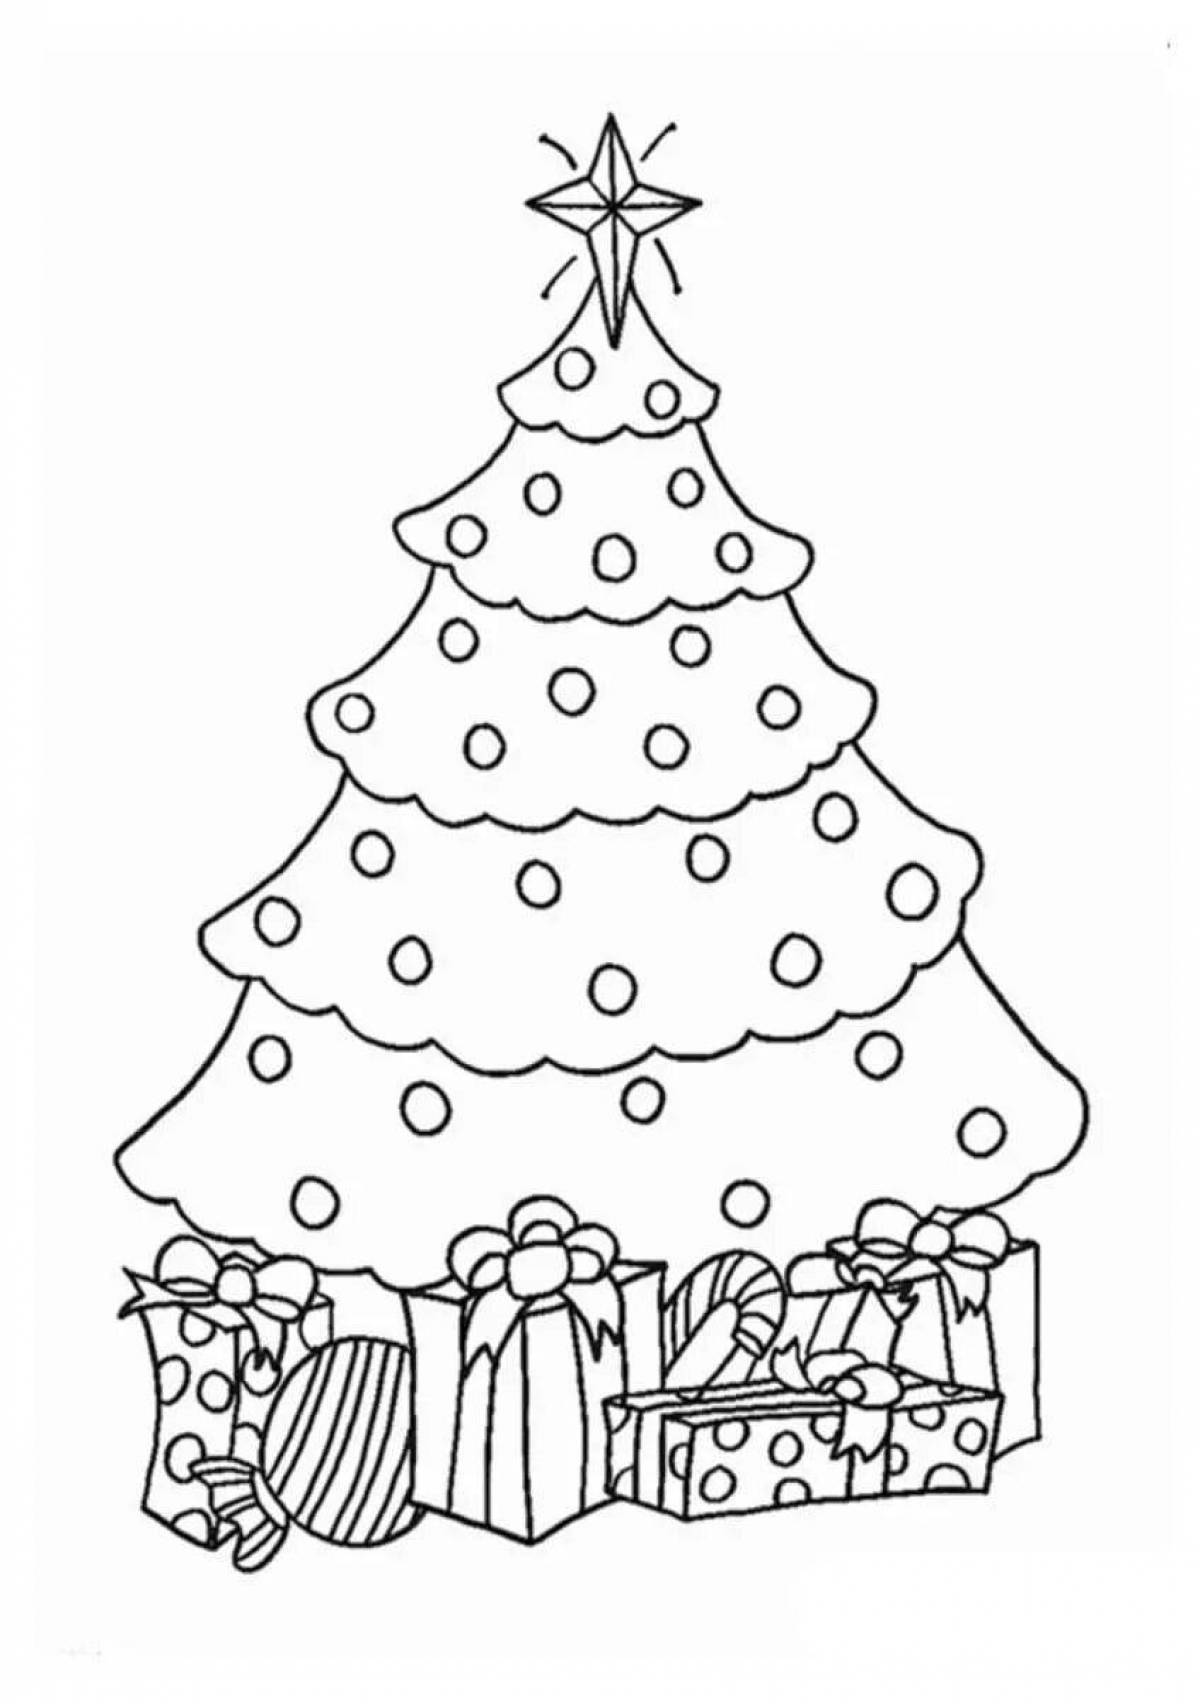 Bright Christmas tree coloring book